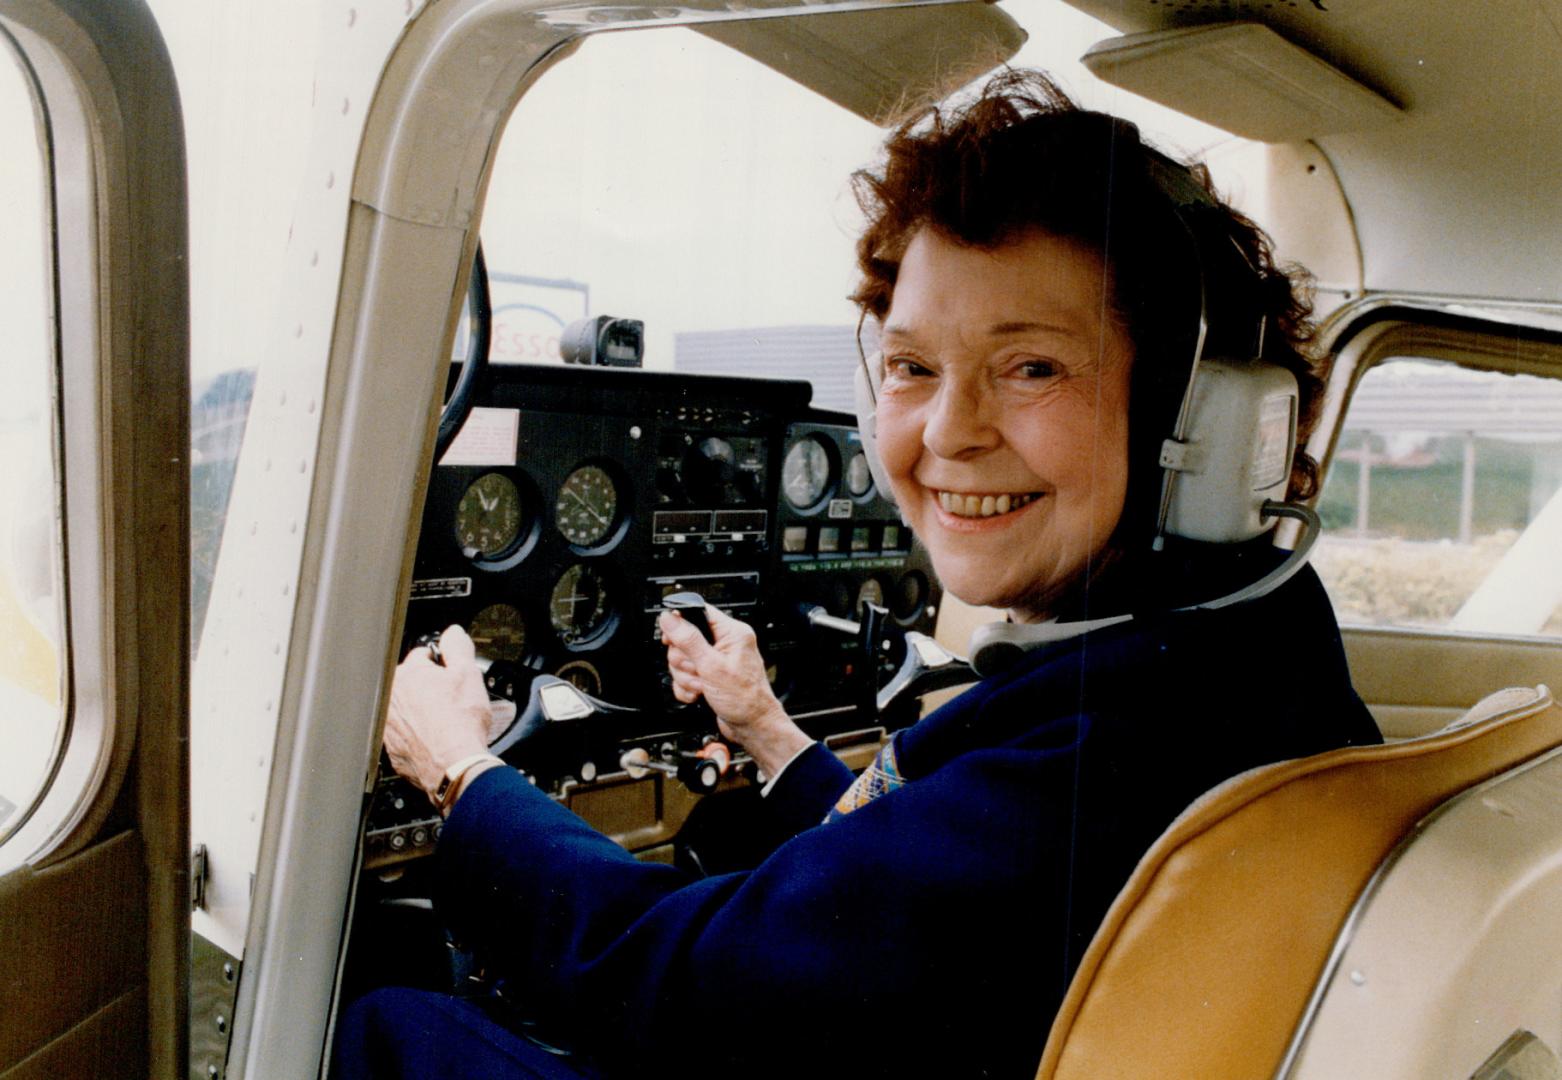 Many firsts, Marion Orr, 71, got her private pilot's licence on April 22, 1939